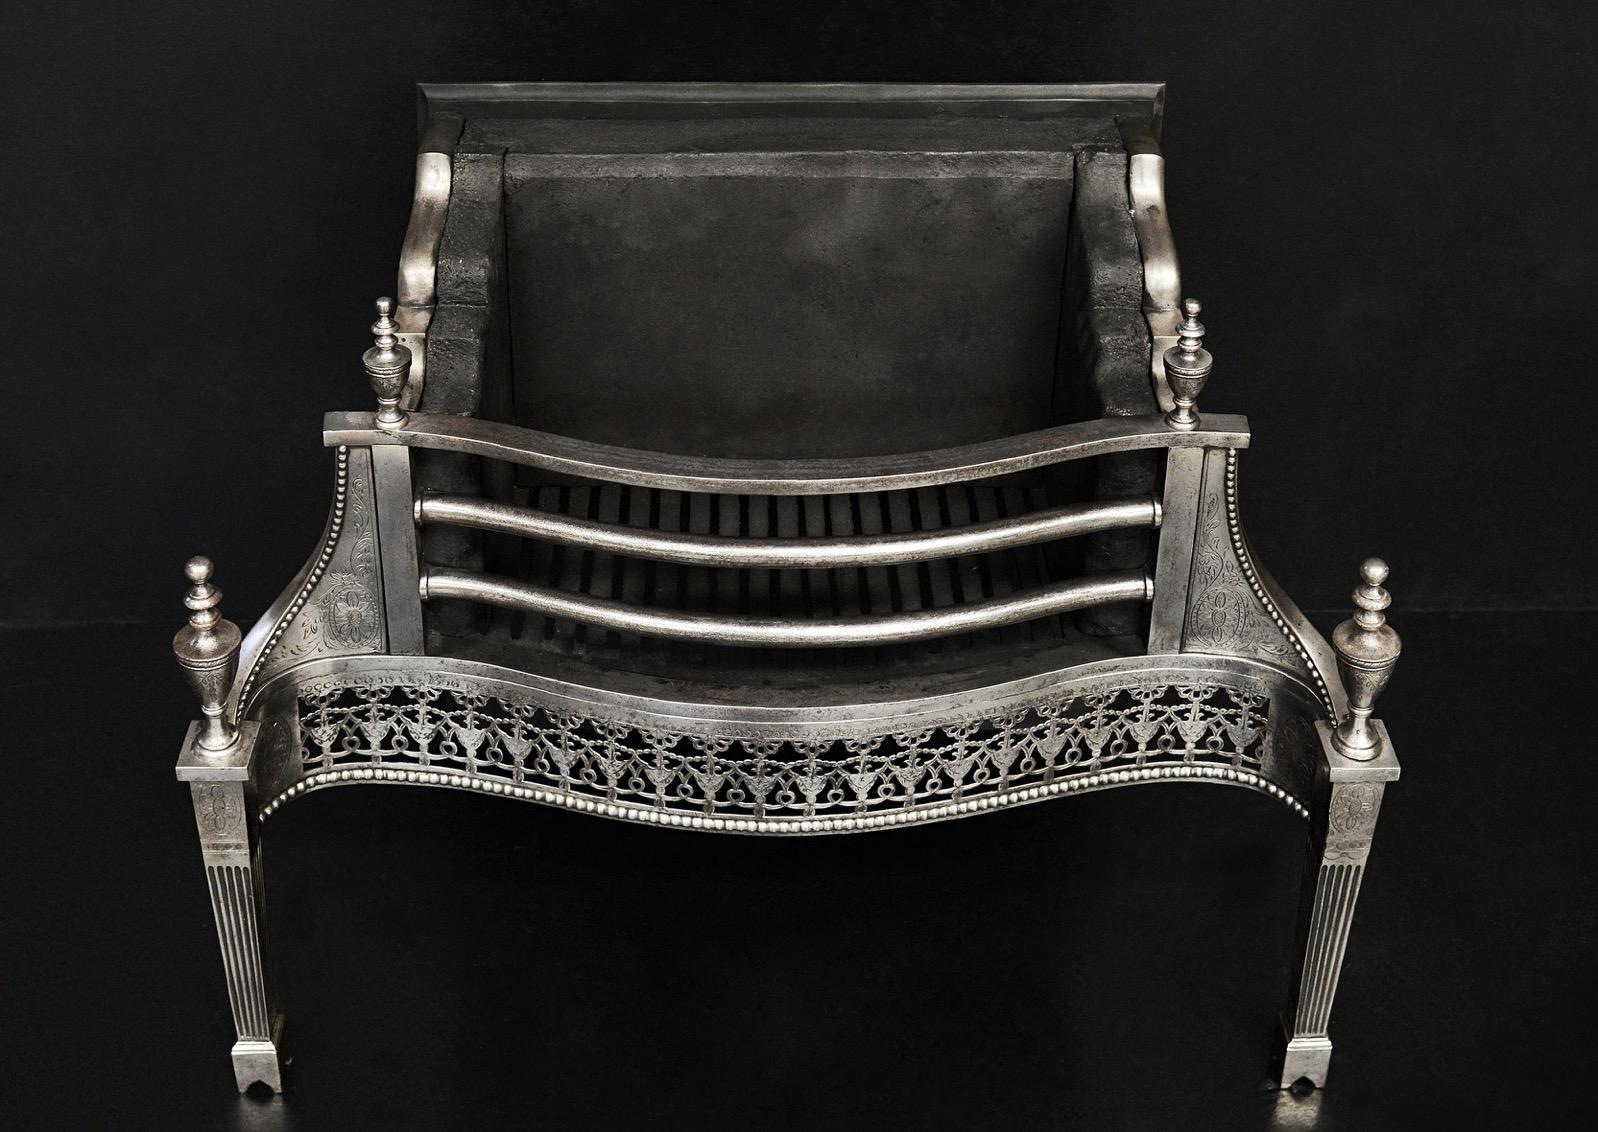 A very fine quality polished steel firegrate in the Georgian manner. The delicately pierced fret with engraving throughout, the tapering legs with flutes, engraved paterae and finials. The side wings with engraving and beading surmounted by urn